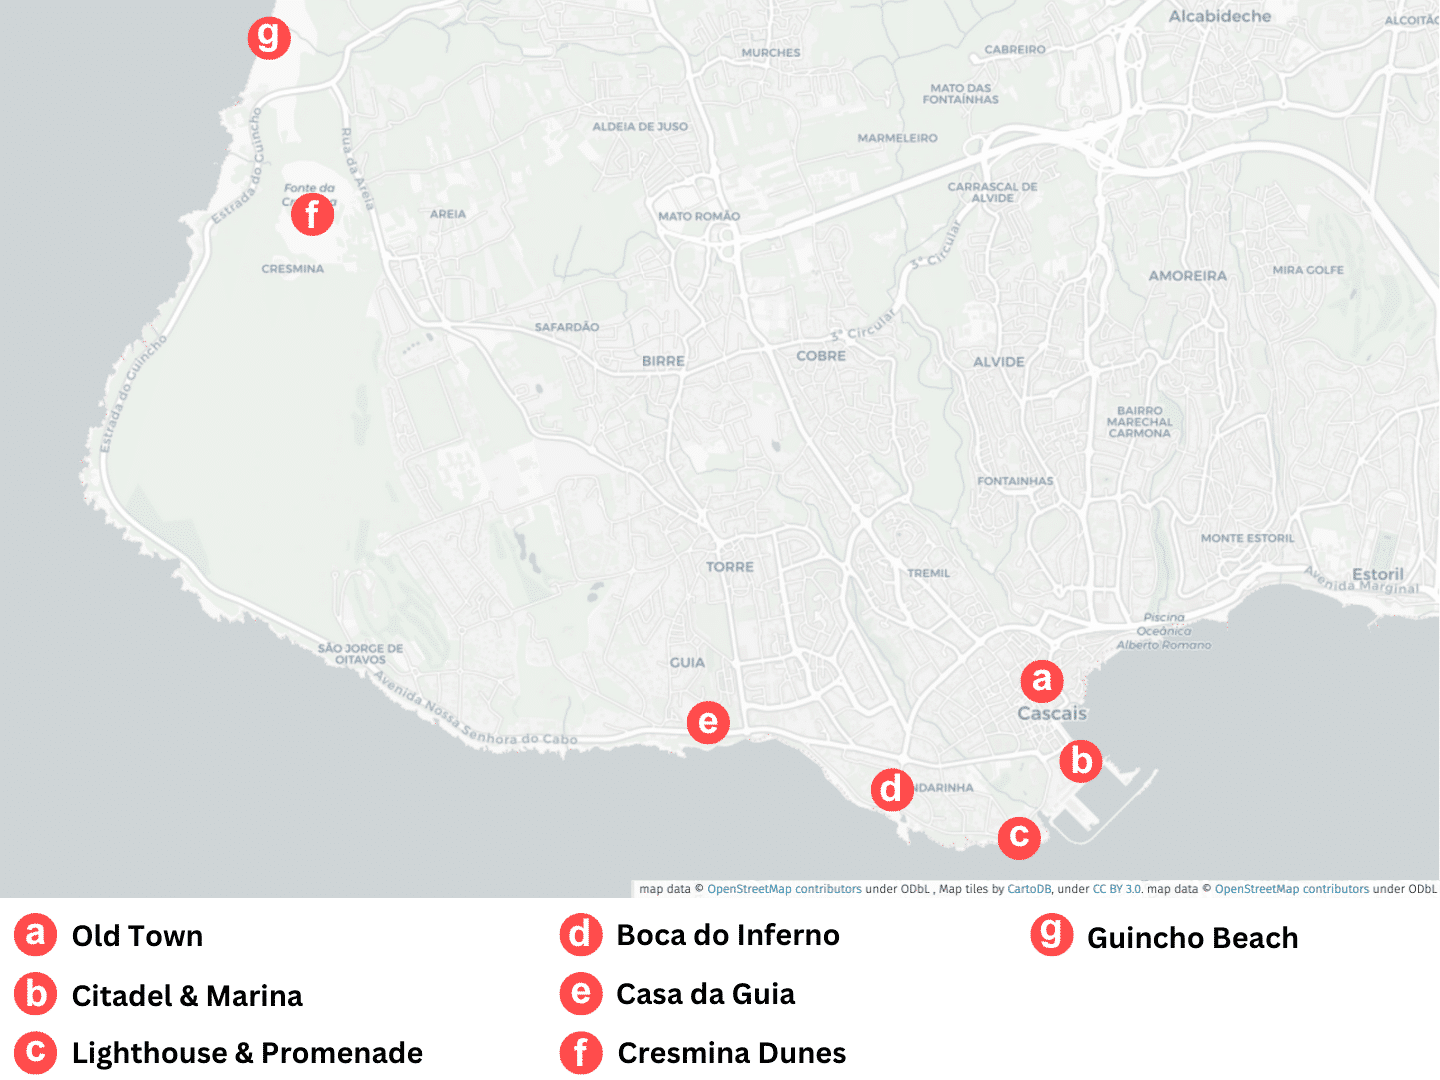 map of cascais with markers of all the things to do in cascais that I covered covered in this segment